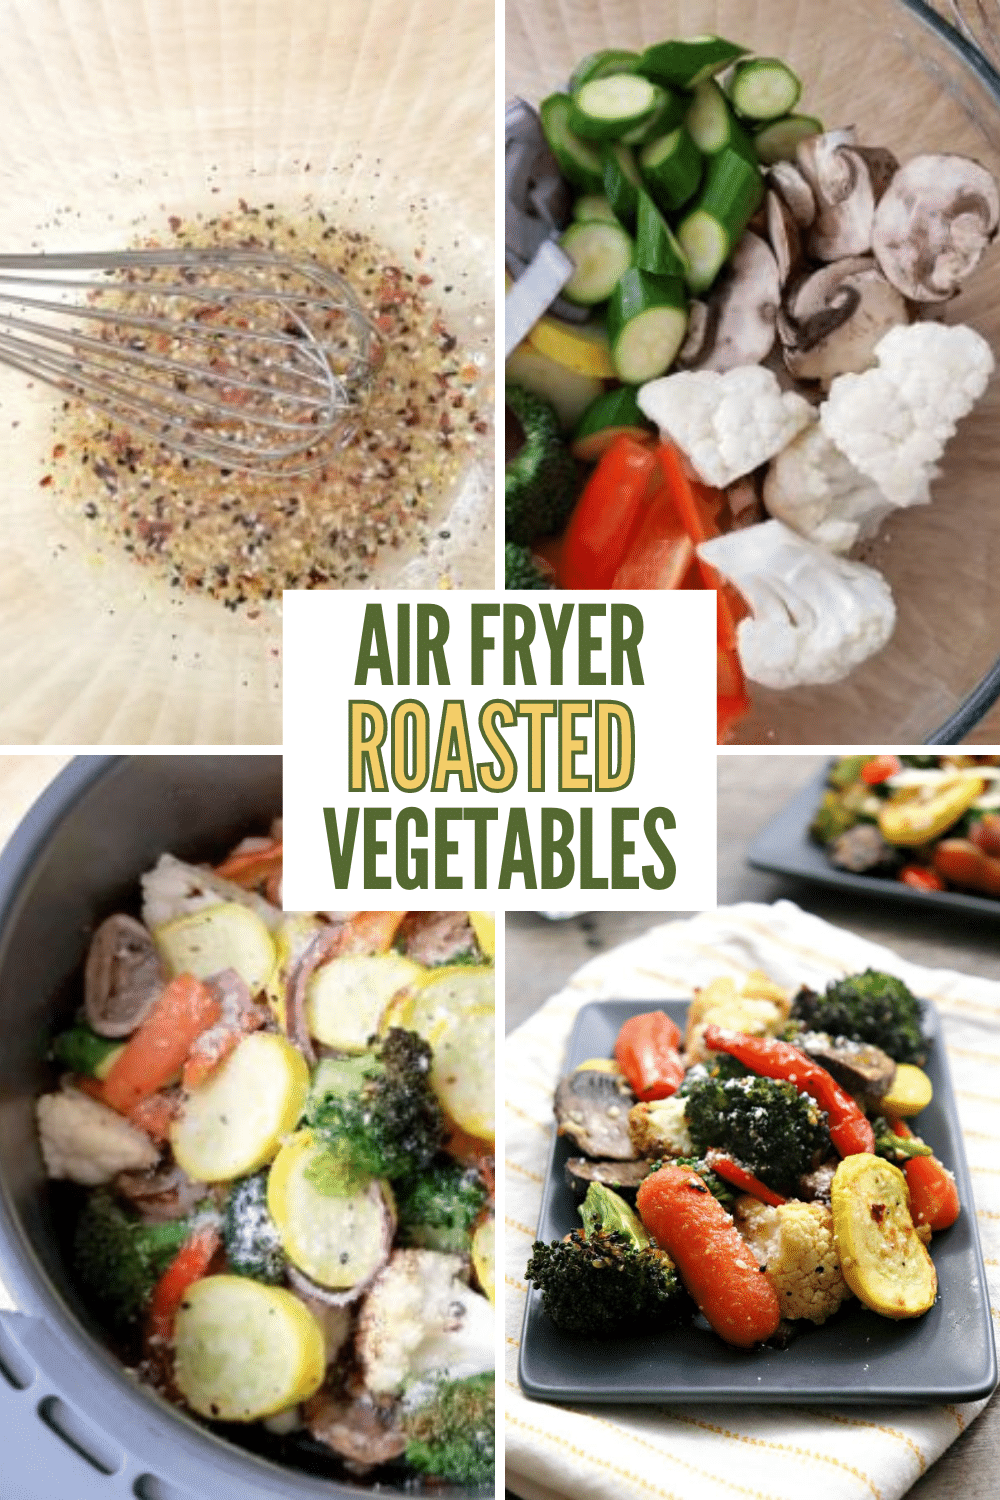 Air Fryer Roasted Vegetables are a healthy and delicious way to enjoy your favorite vegetables. Even kids love this crispy flavorful dish. #airfryer #roastedvegetables #recipe via @wondermomwannab